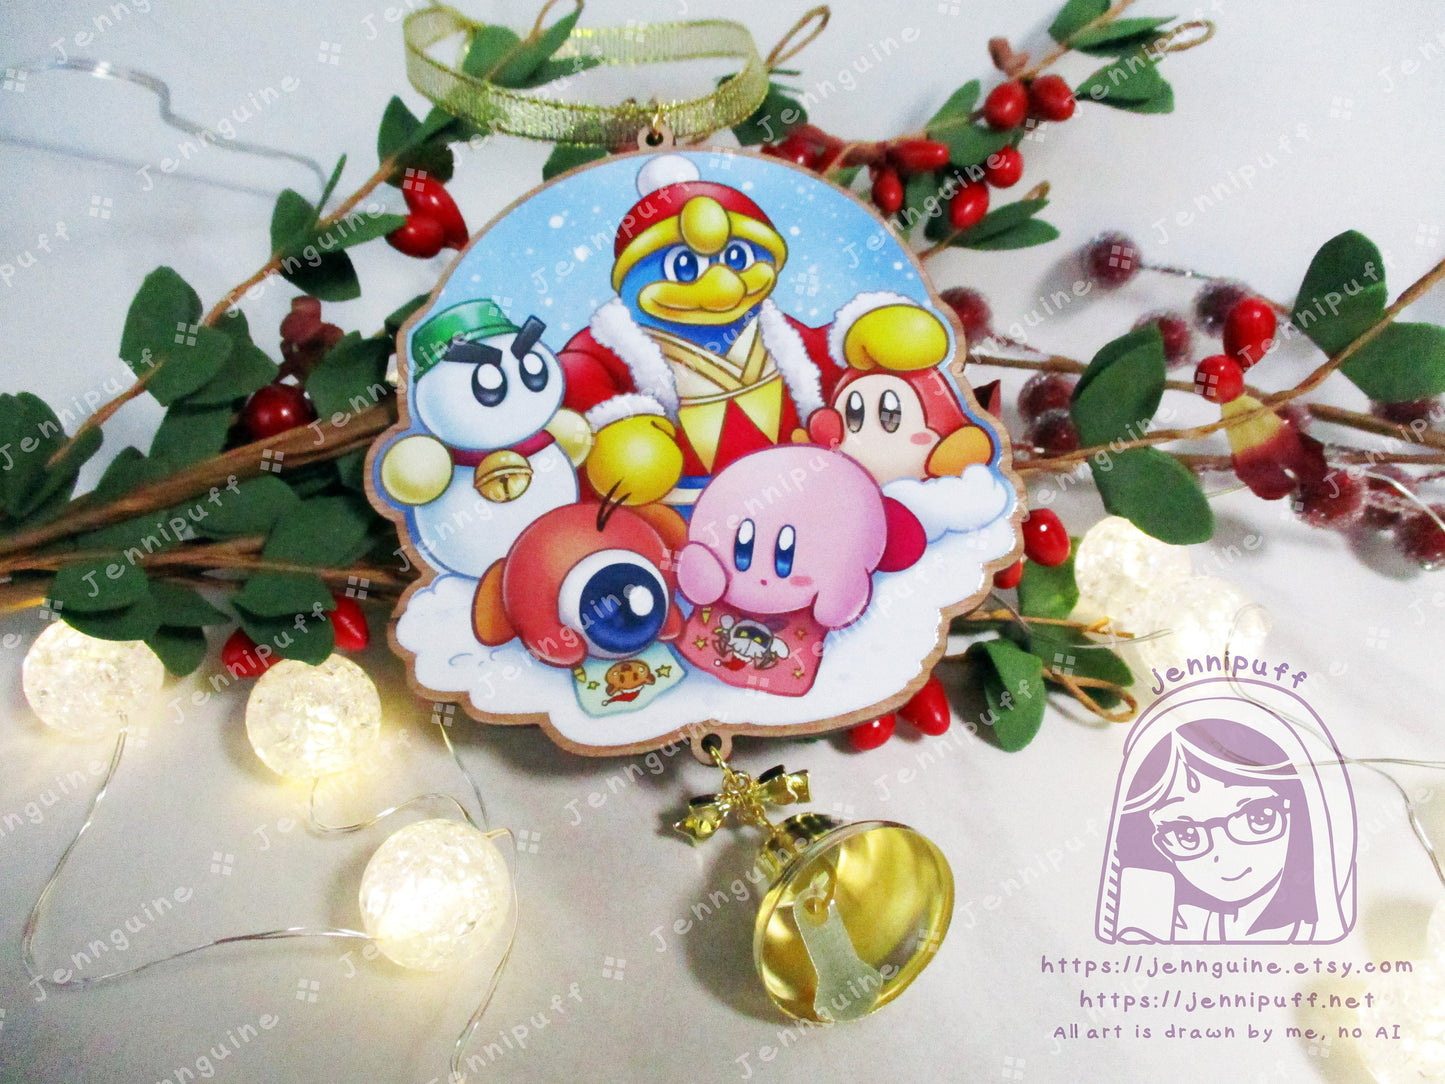 Kirby Wooden Christmas Ornament | Comes with 4x6in Print | Kirby, WaddleDoo, WaddleDee, Chilly, King Dedede Holiday Ornament Decoration Gift